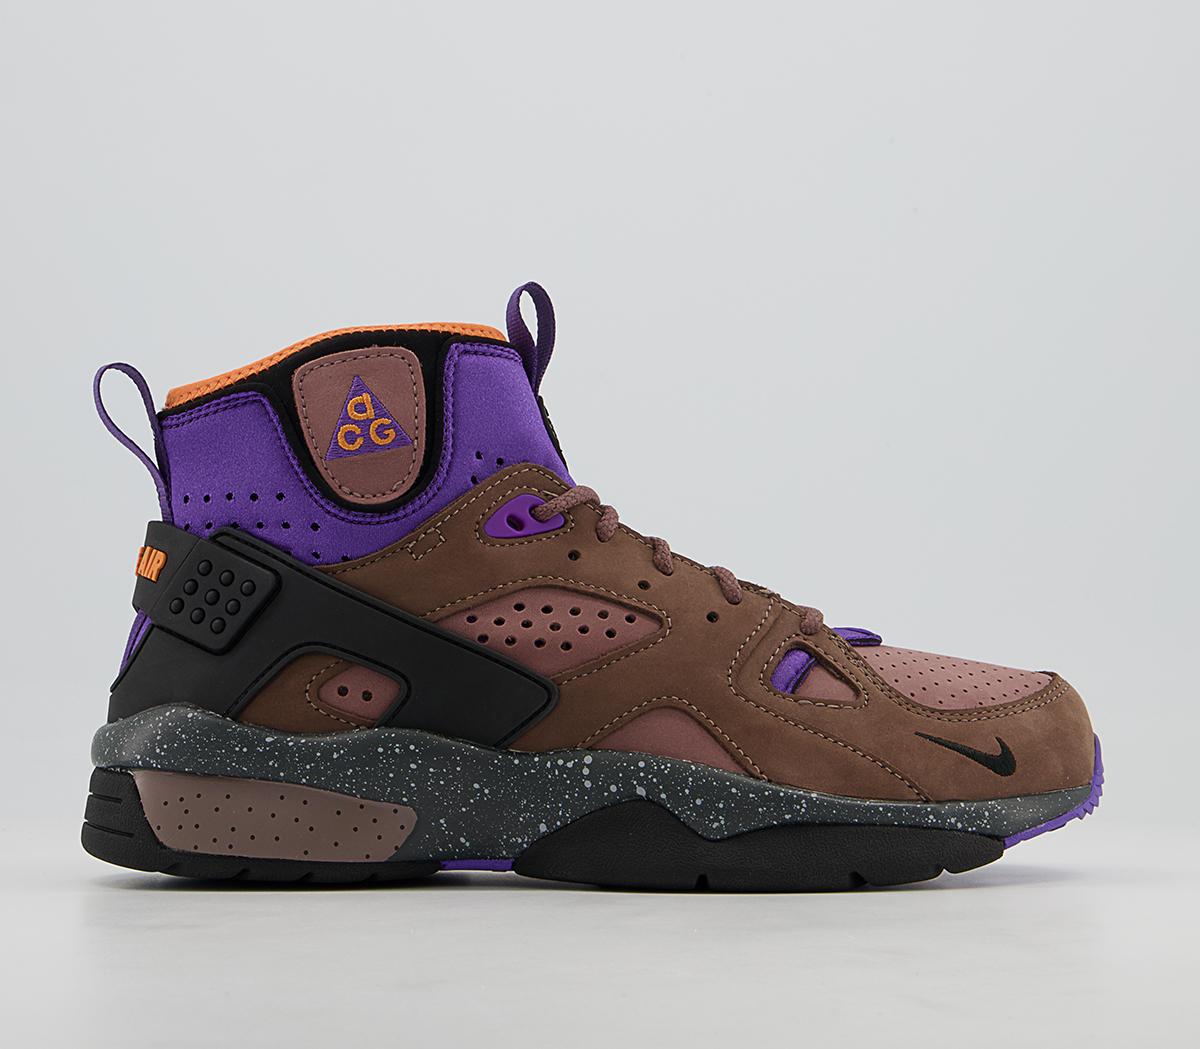 NikeAcg Air Mowabb TrainersTrails End Brown Pitch Prism Violet